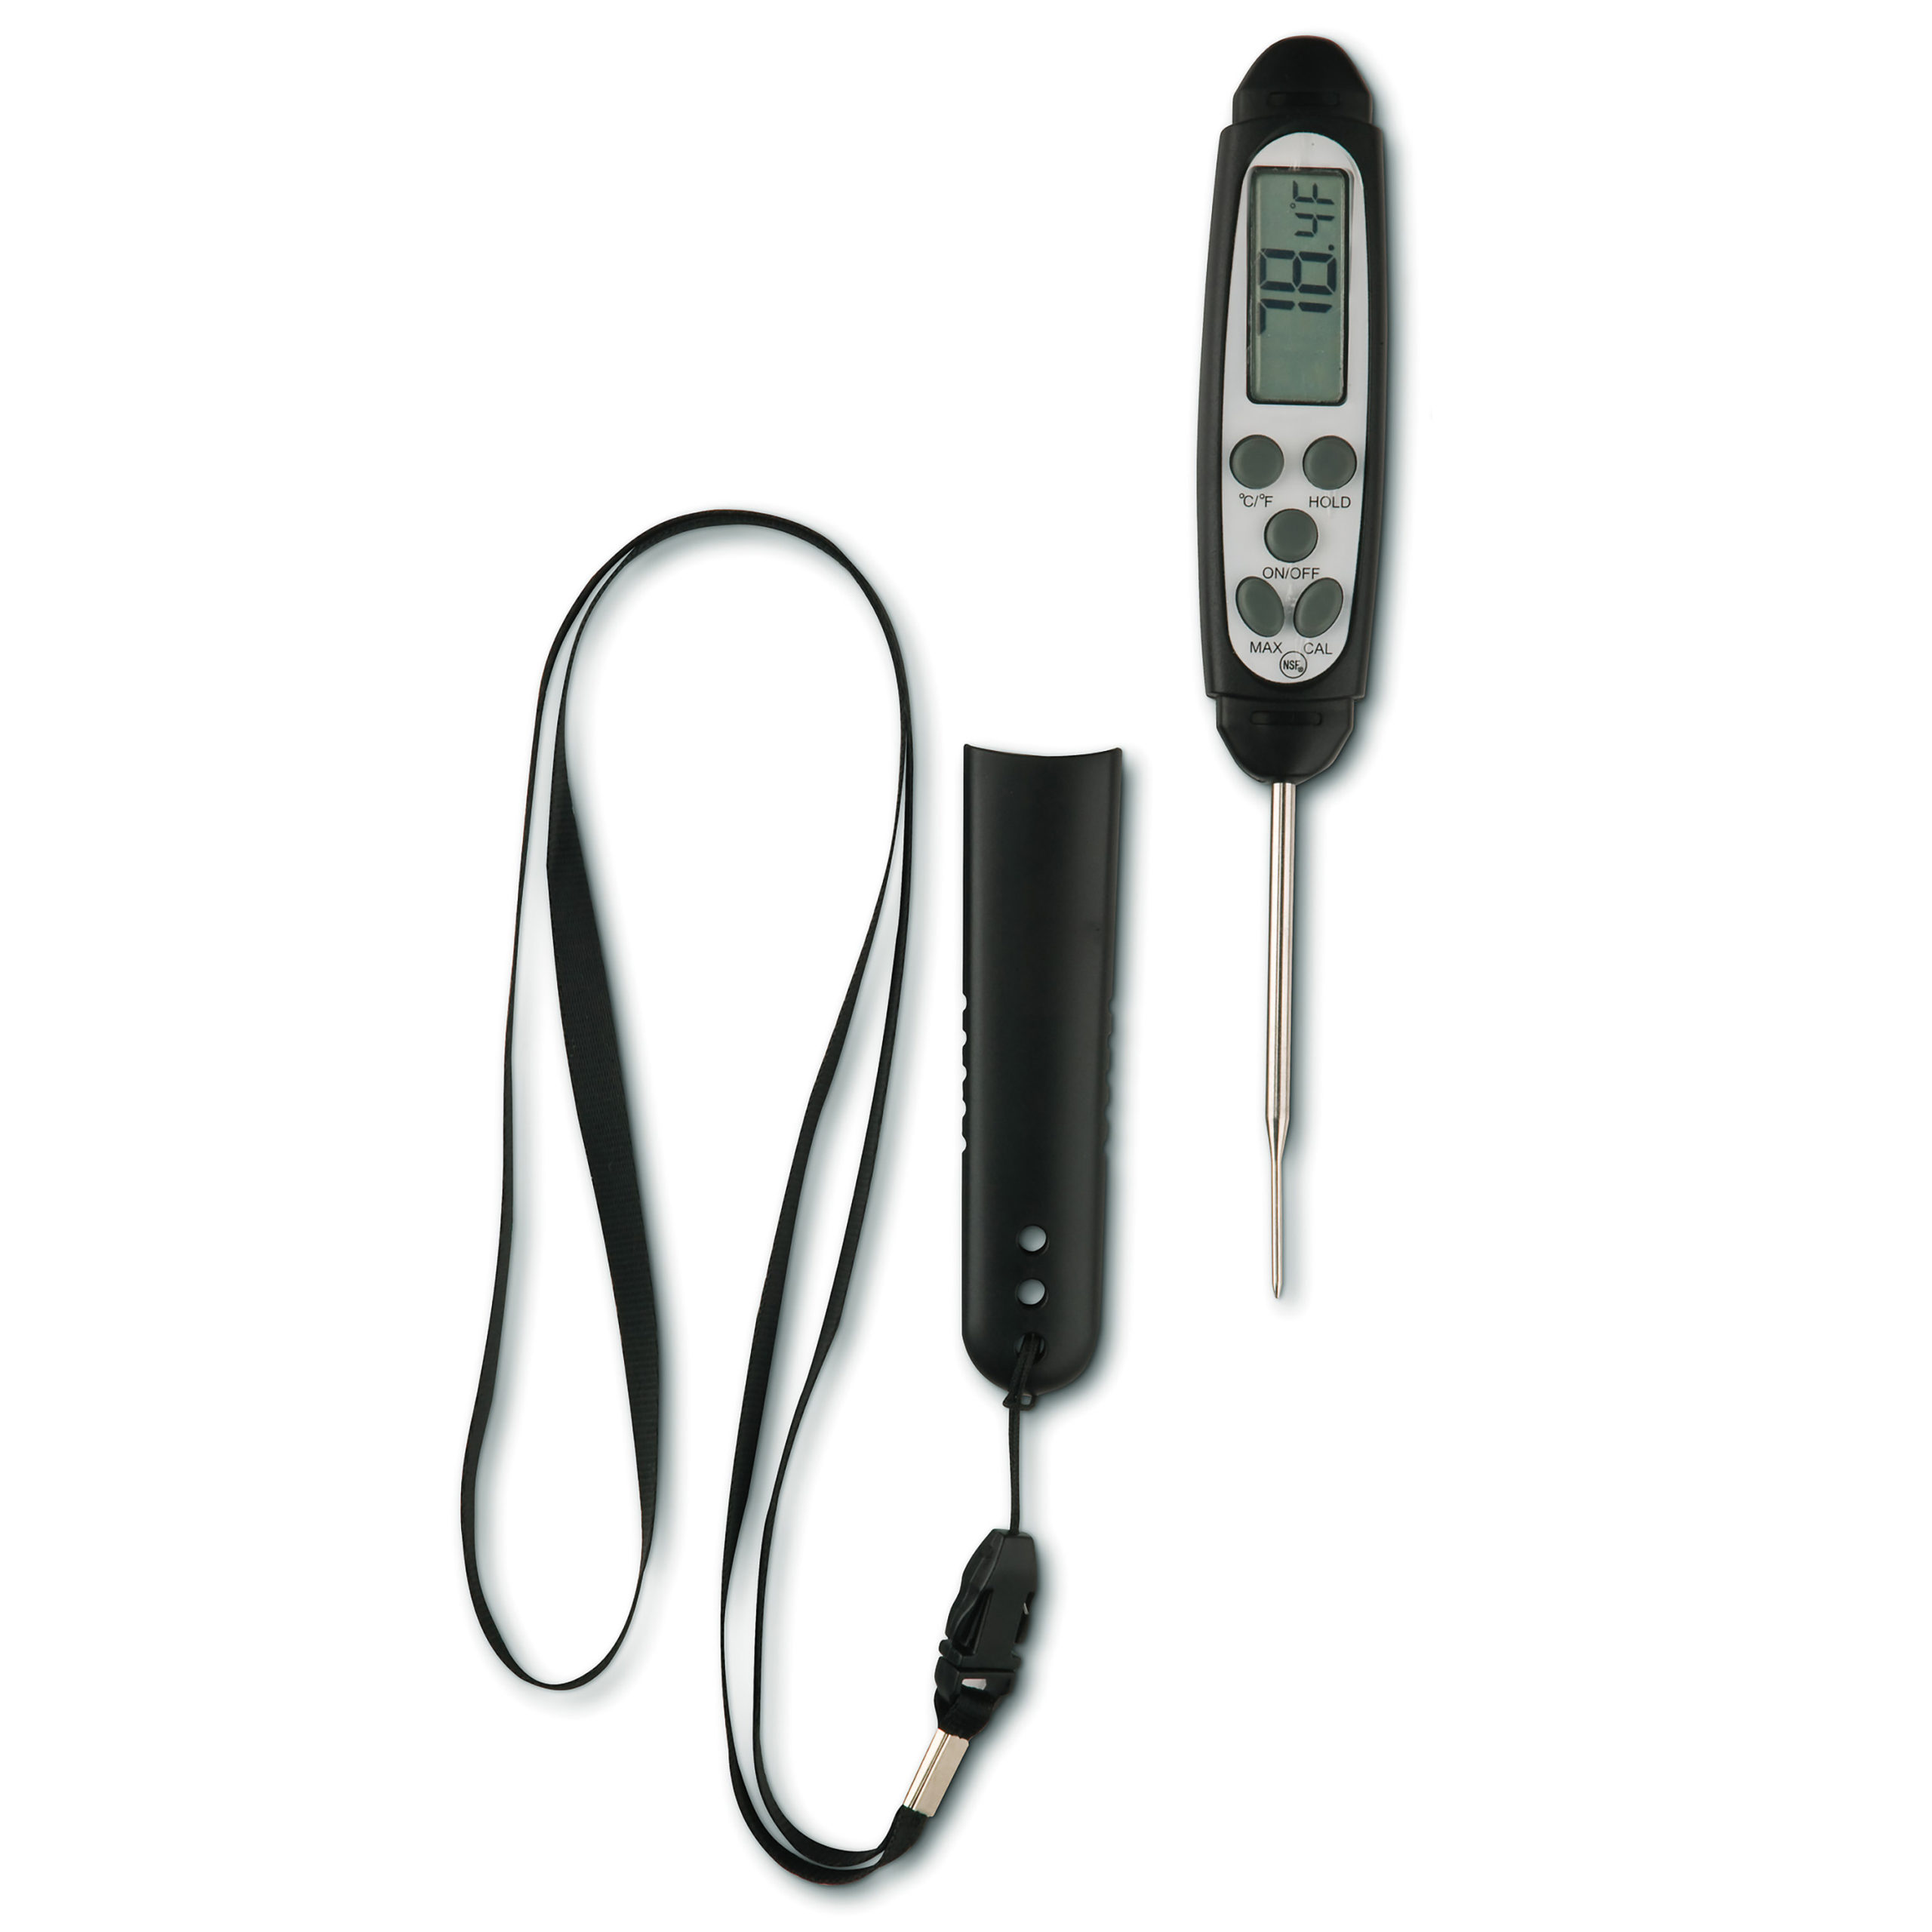 https://www.maverickthermometers.com/wp-content/uploads/2021/05/DT-09C_1_product-scaled.jpg